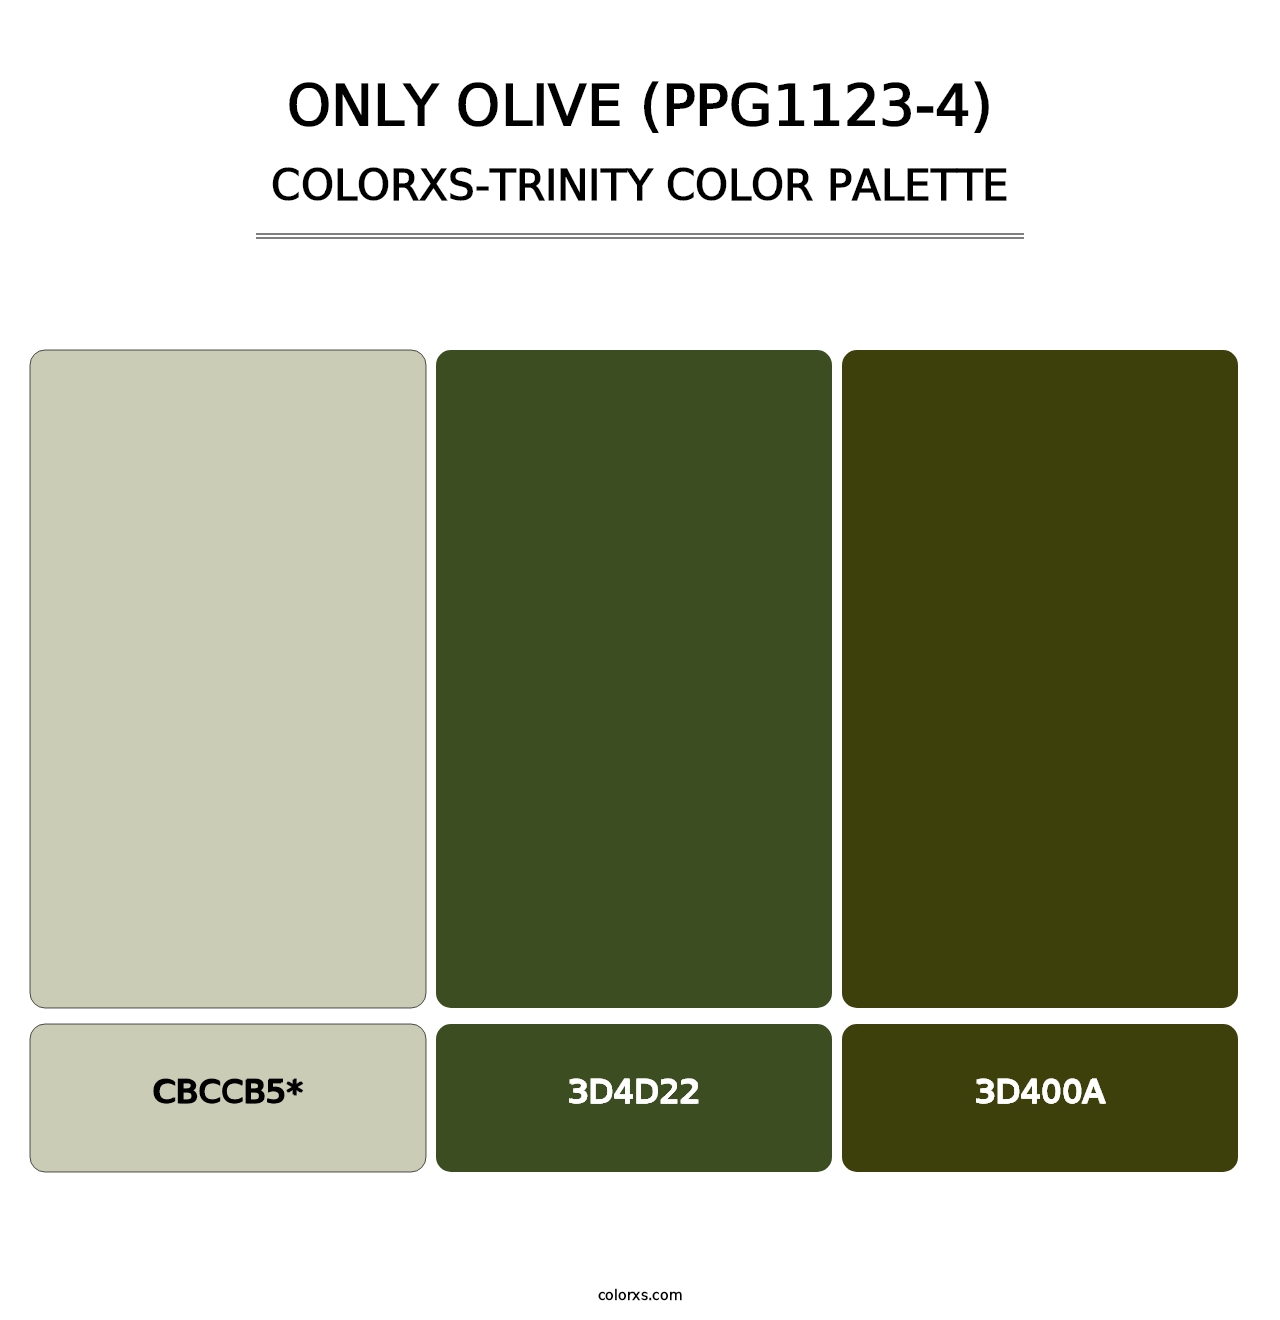 Only Olive (PPG1123-4) - Colorxs Trinity Palette